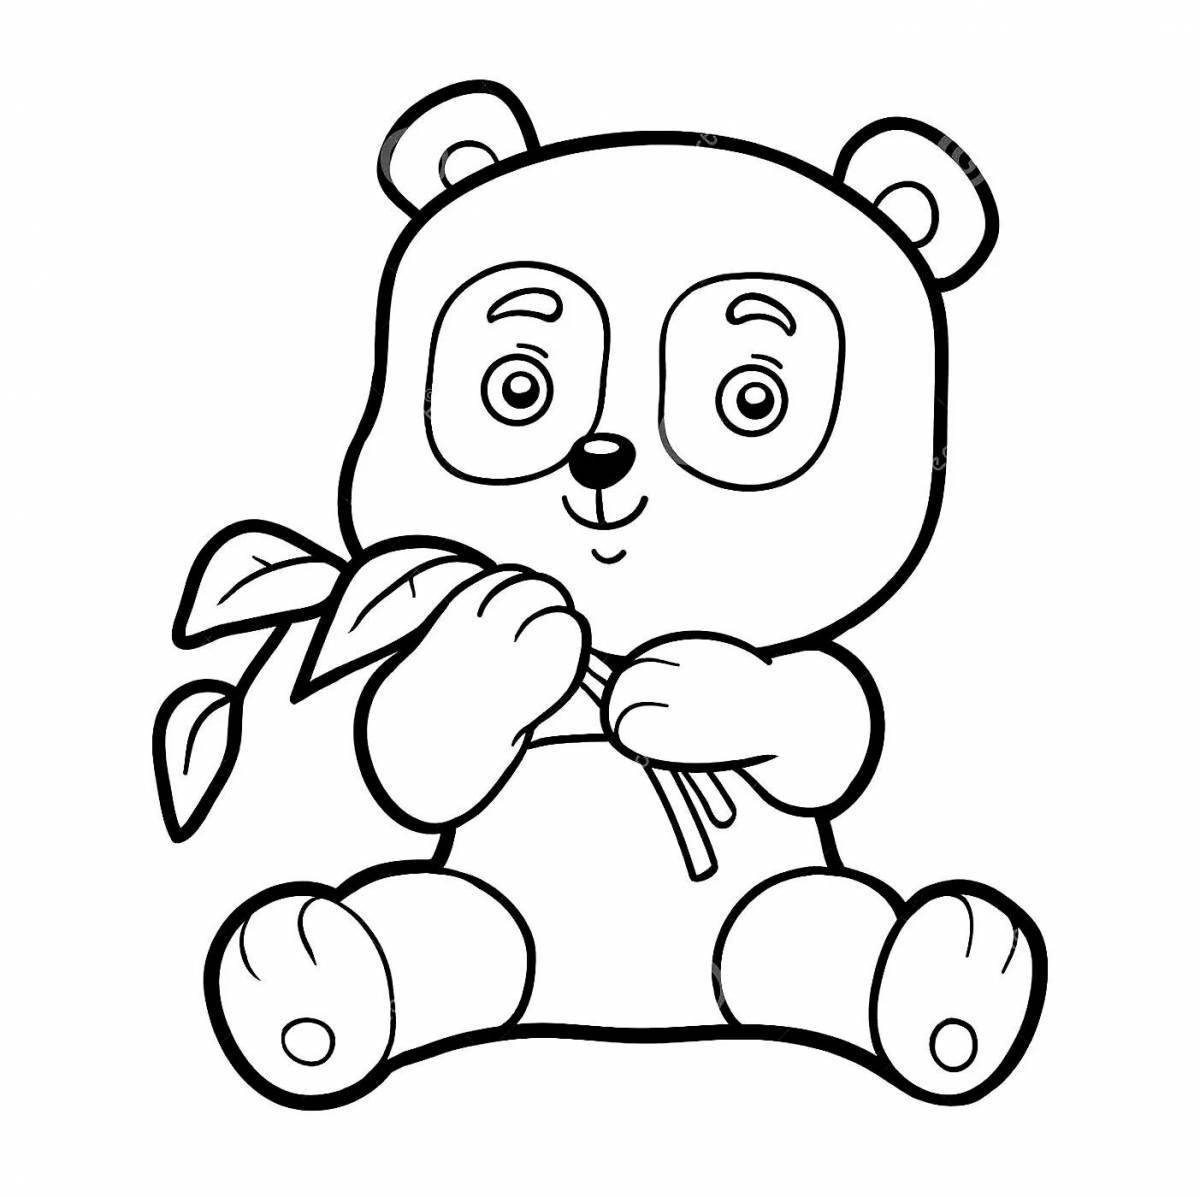 Witty panda coloring pages for girls